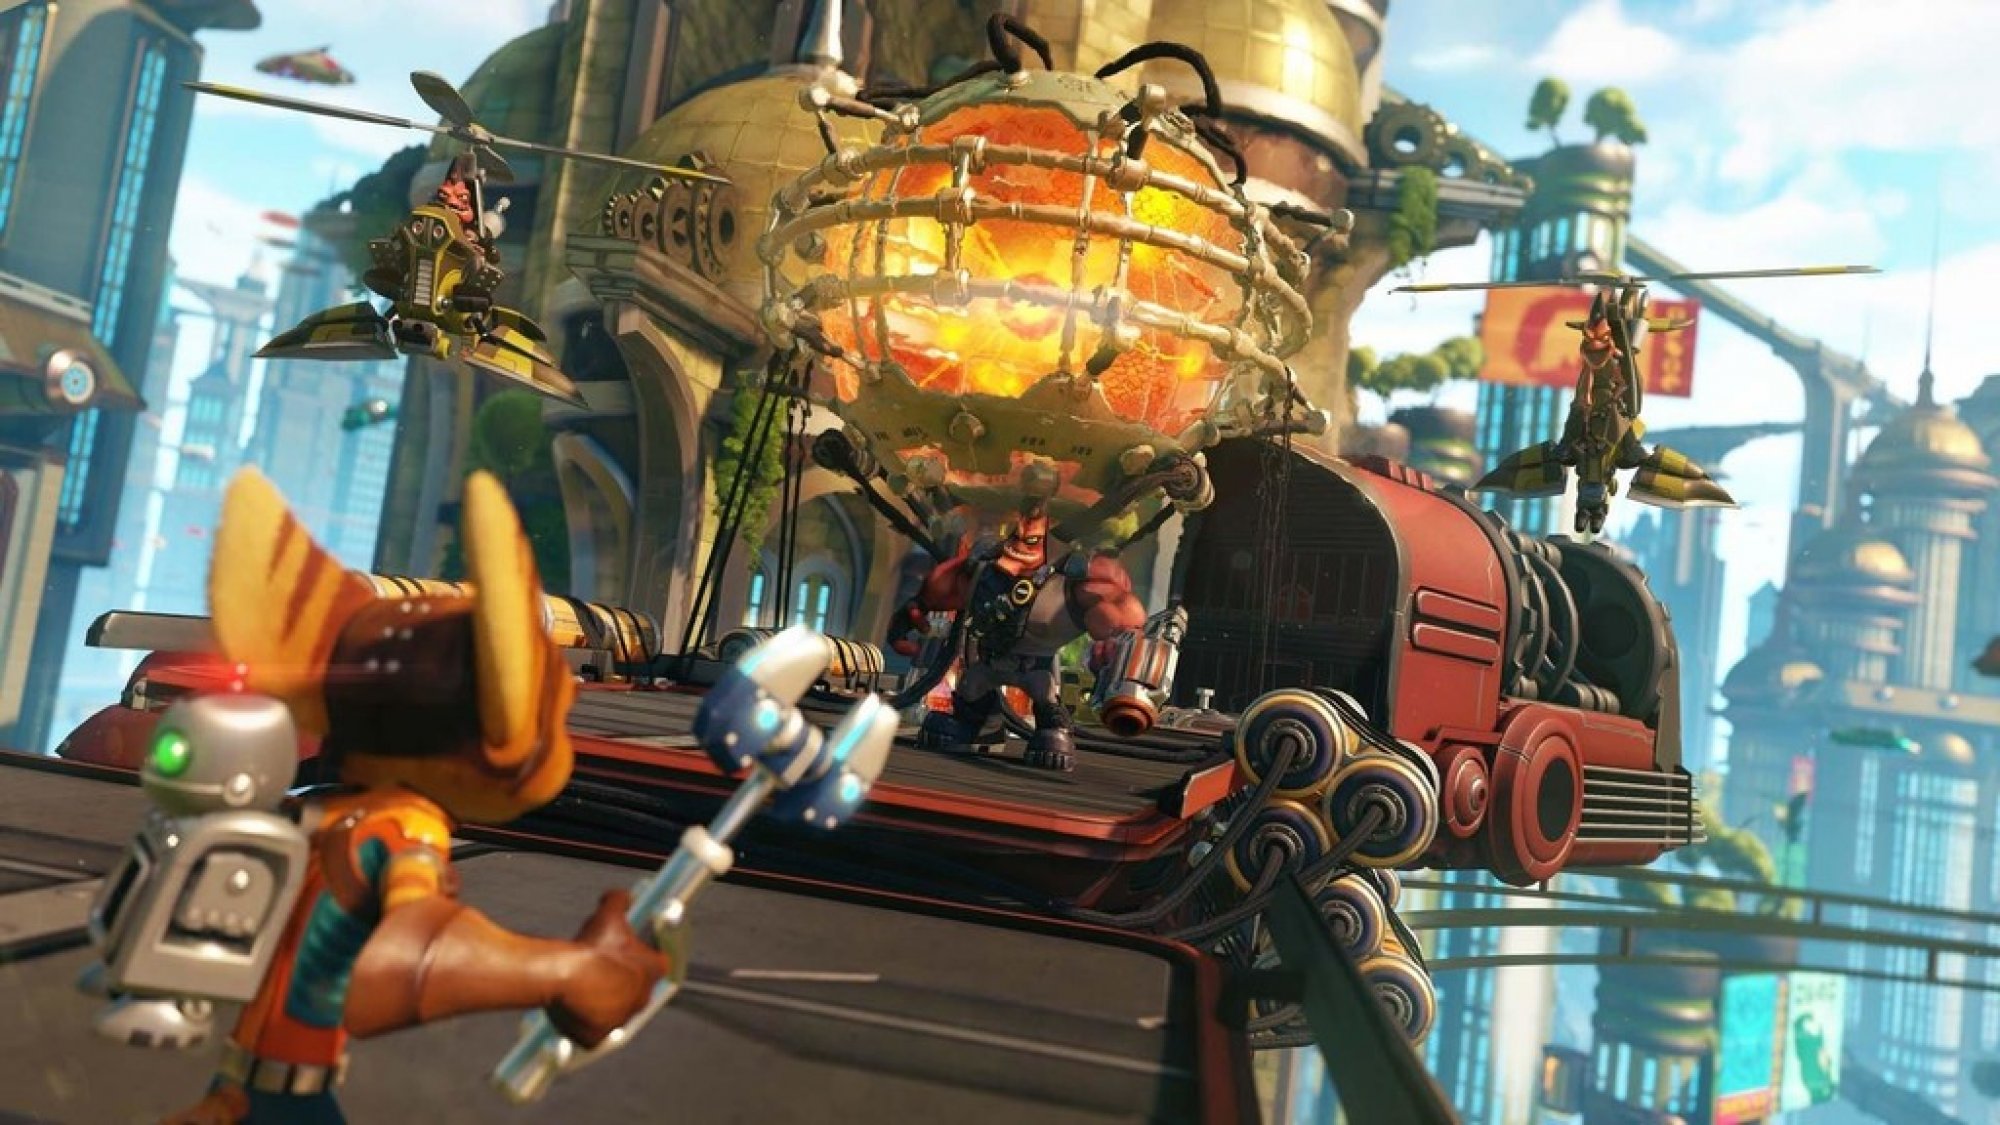 PS4 - HITS Ratchet & Clank 